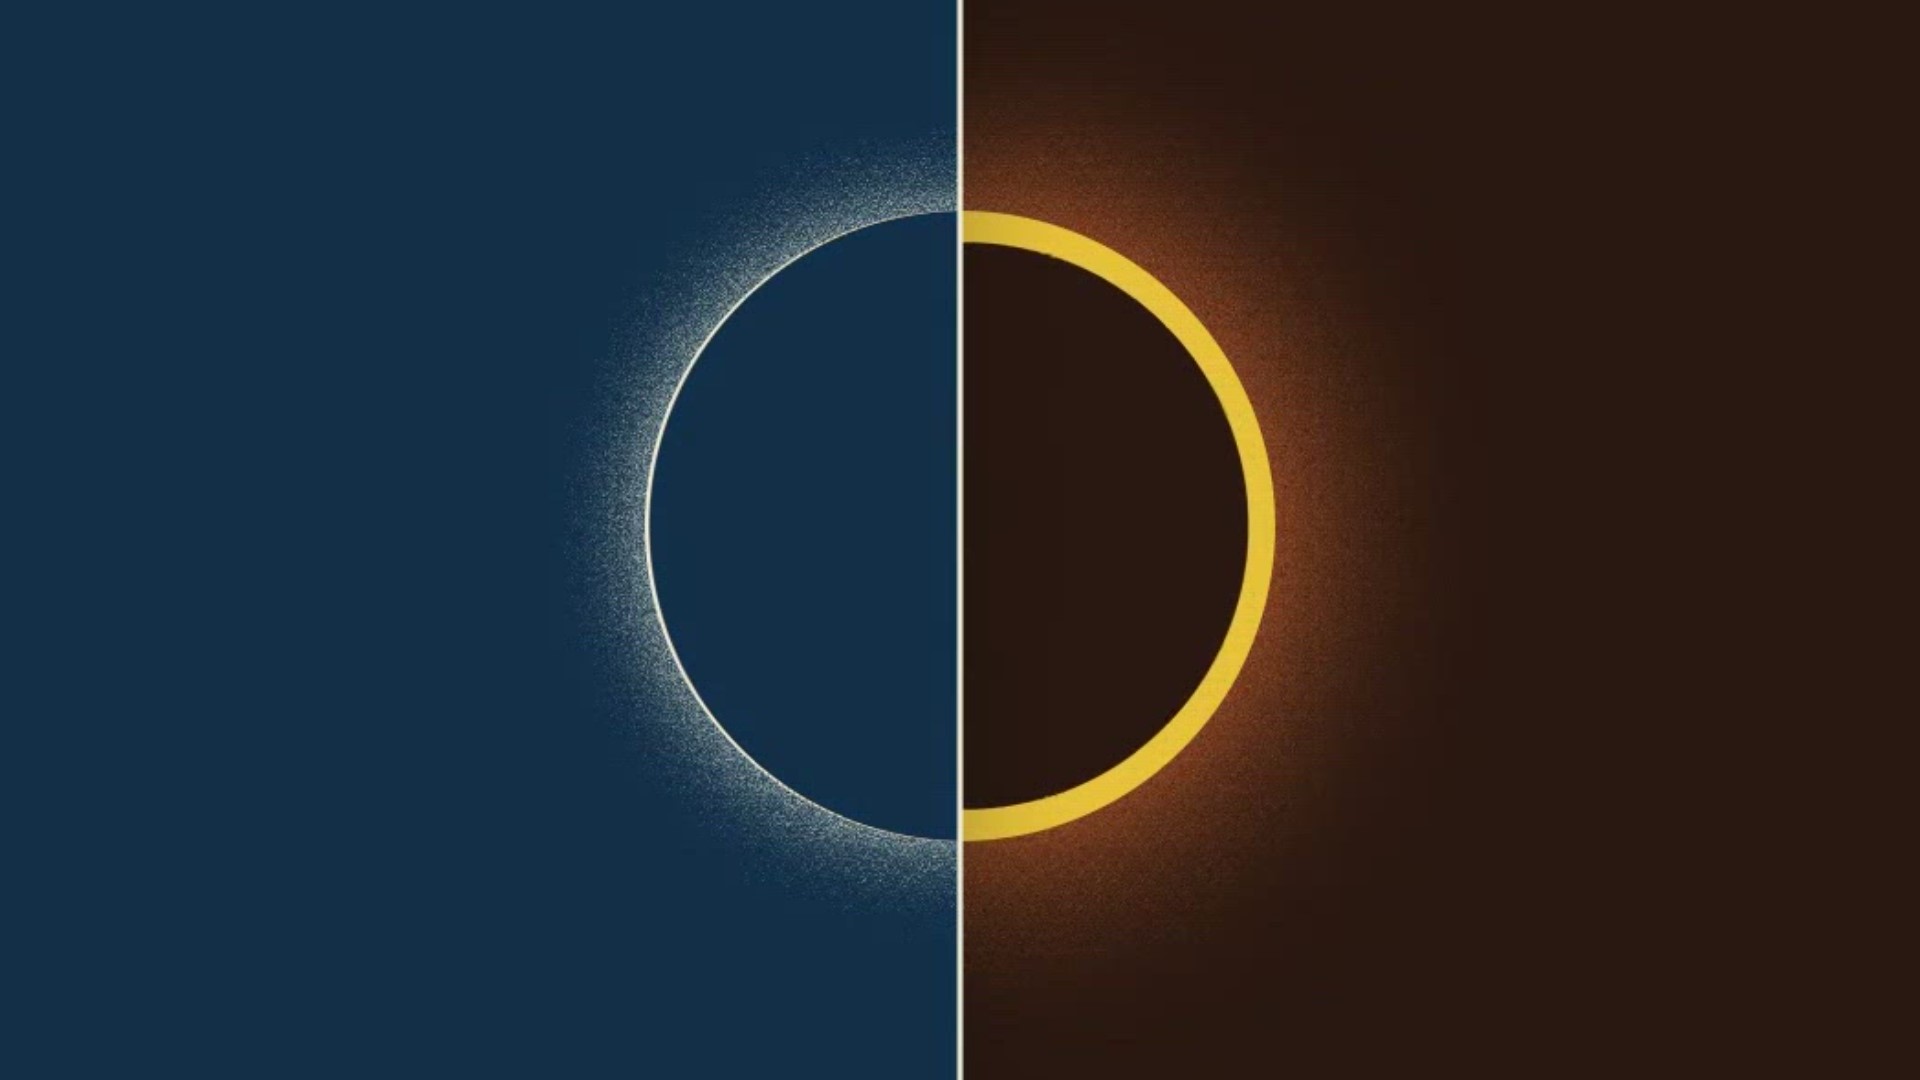 We're less than 50 days away from the Great American Eclipse.